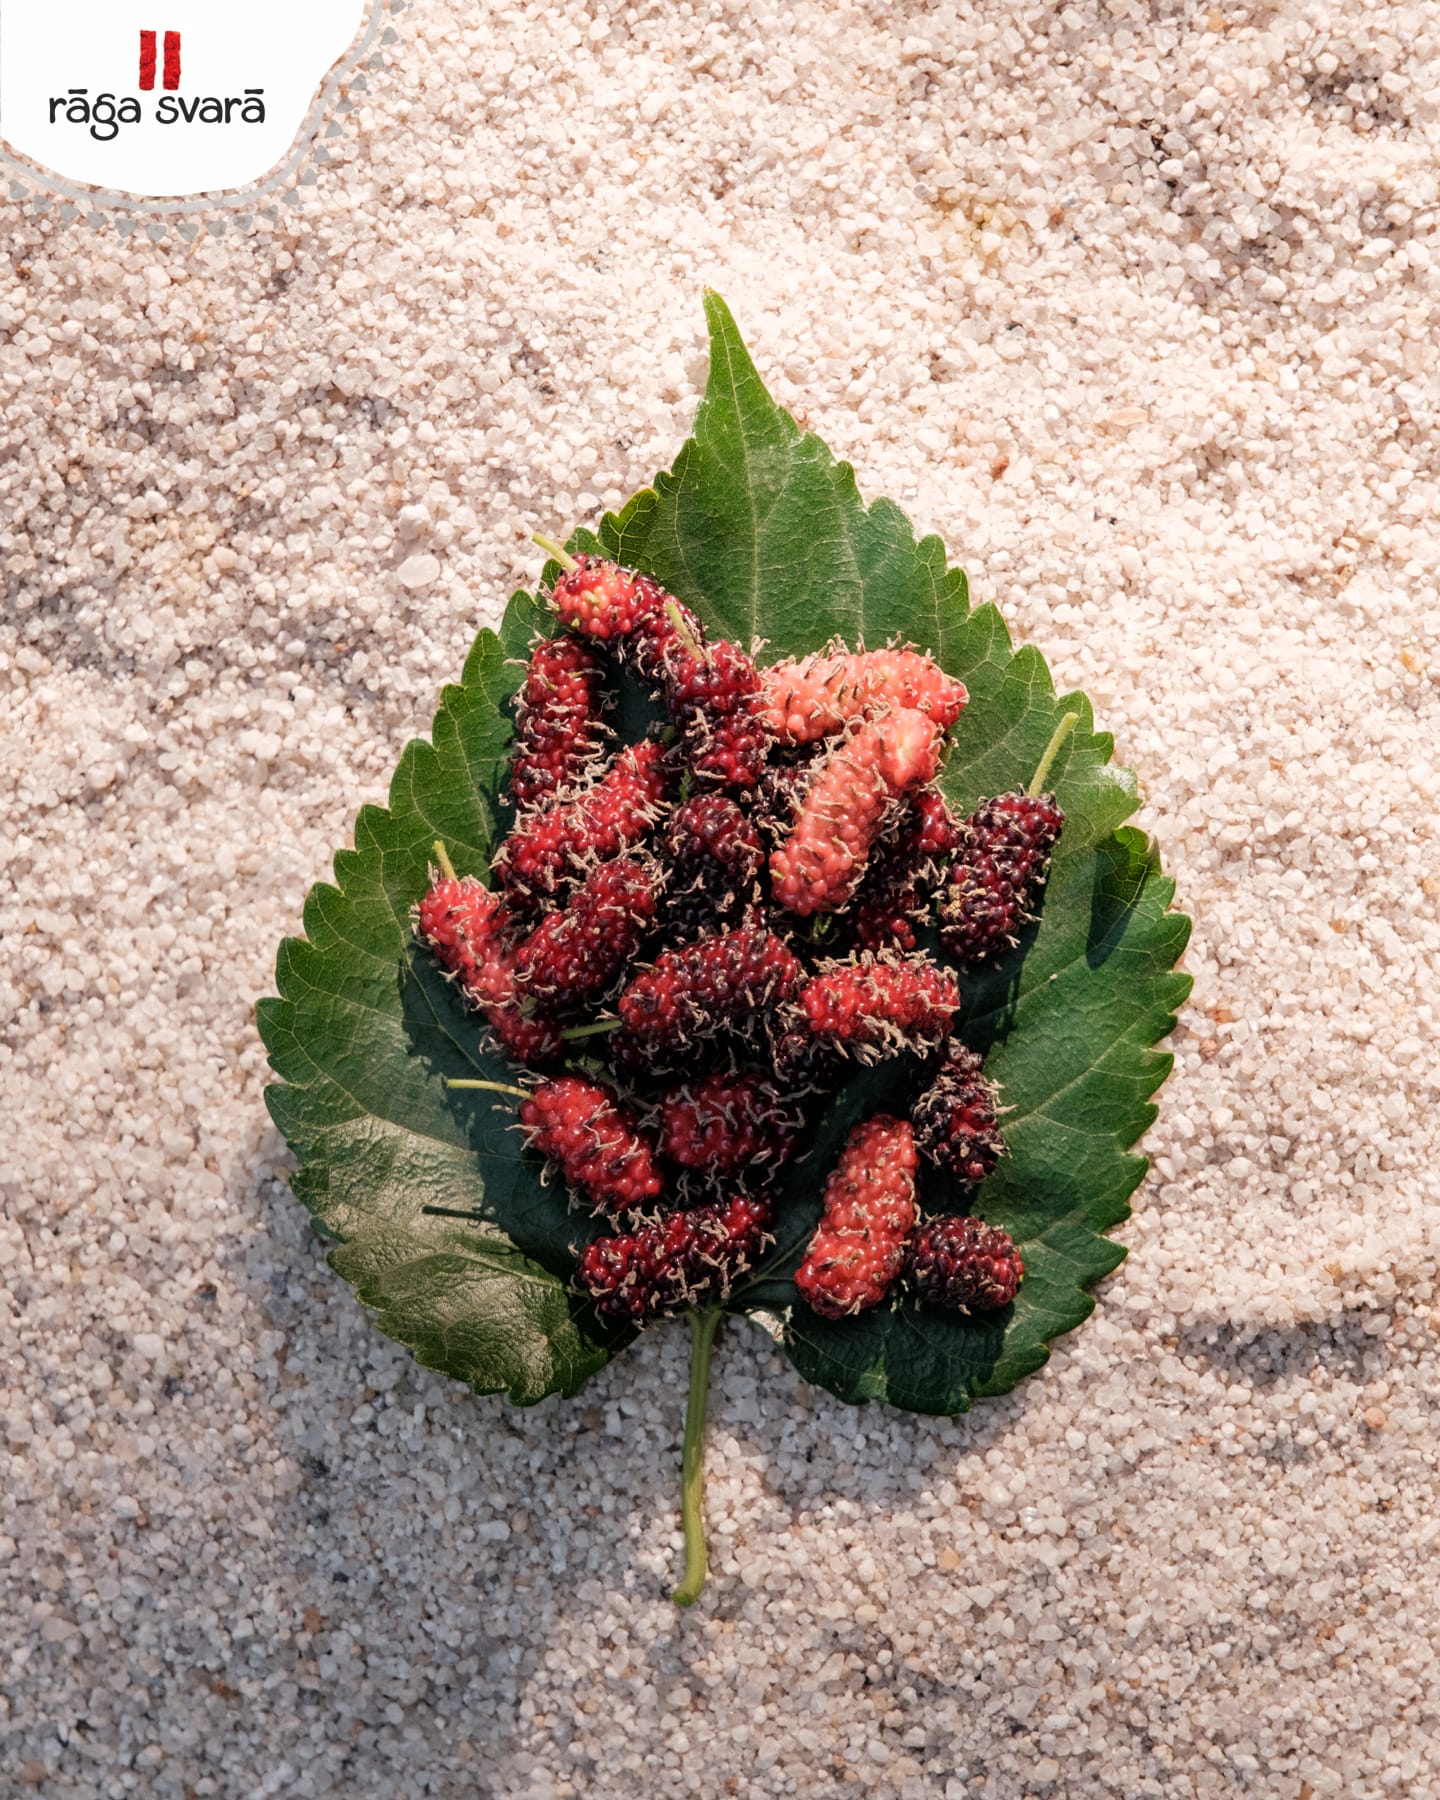 Mulberry - A delightful wild berry